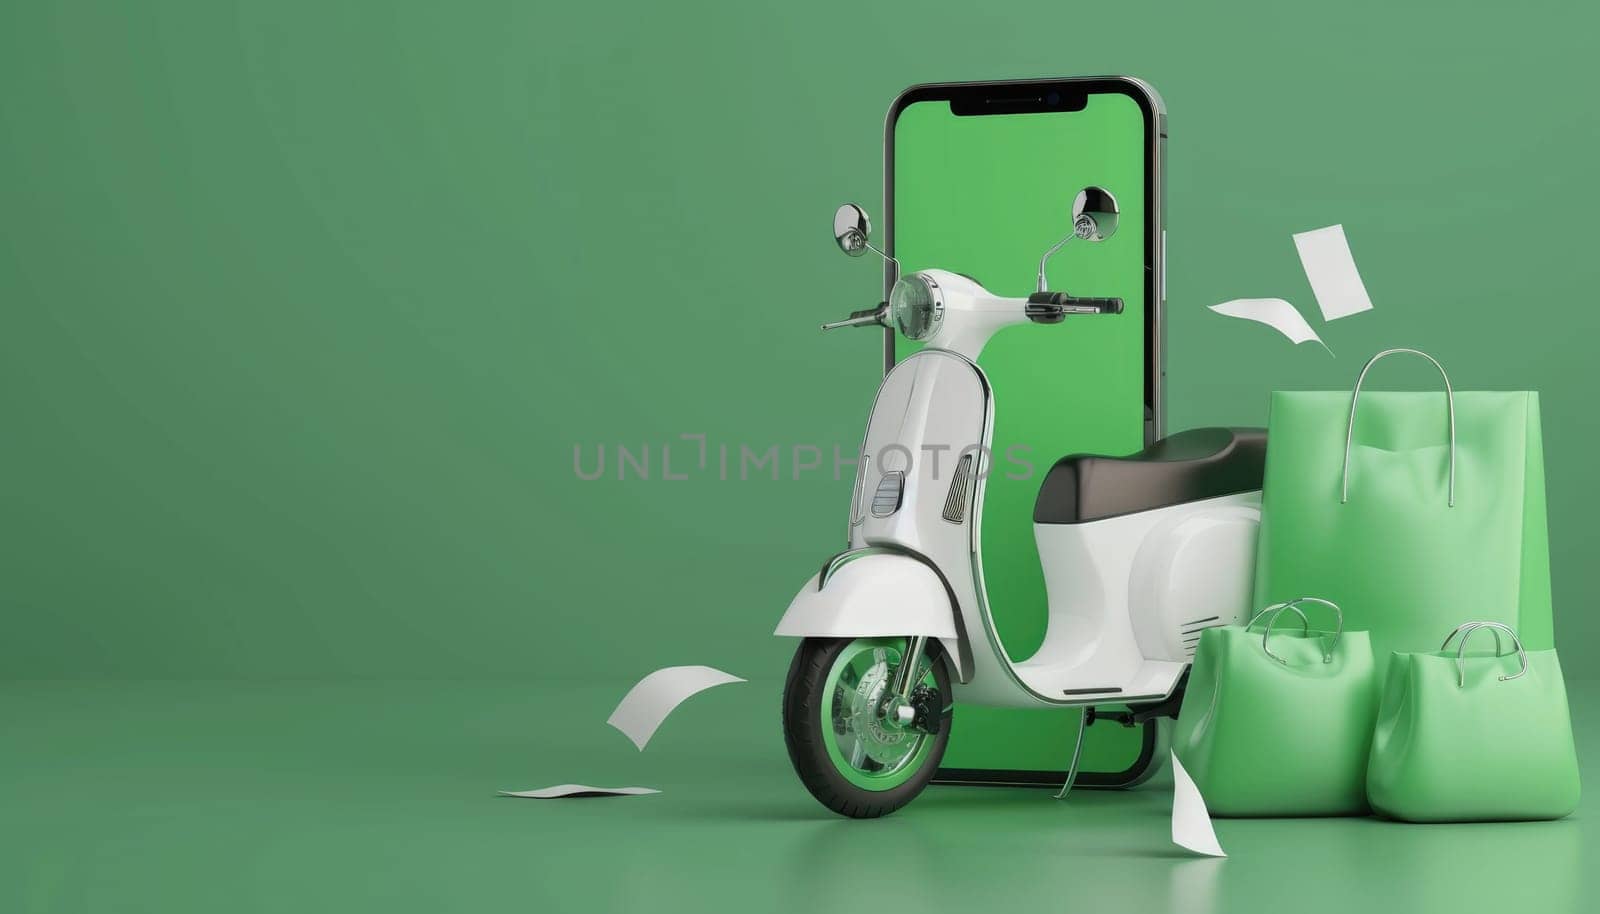 Green food bag or box is placed on white motorcycle or scooter. and all on smartphone with green screen and receipt paper by AI generated image.